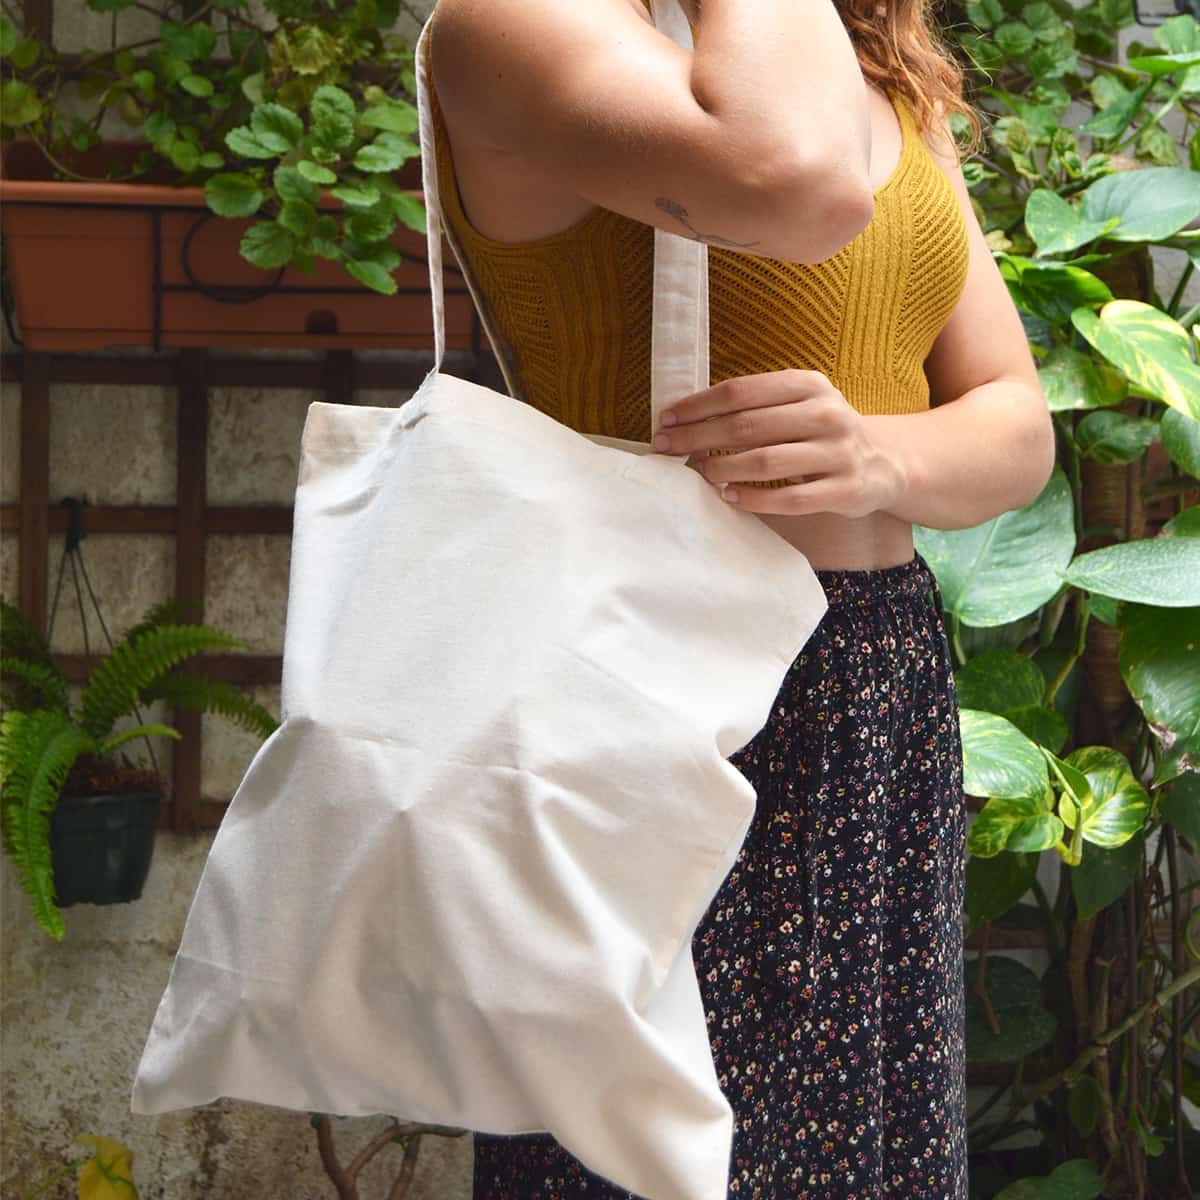 New product : a tote-bag made of recycled textile by Native Spirit - TPOP